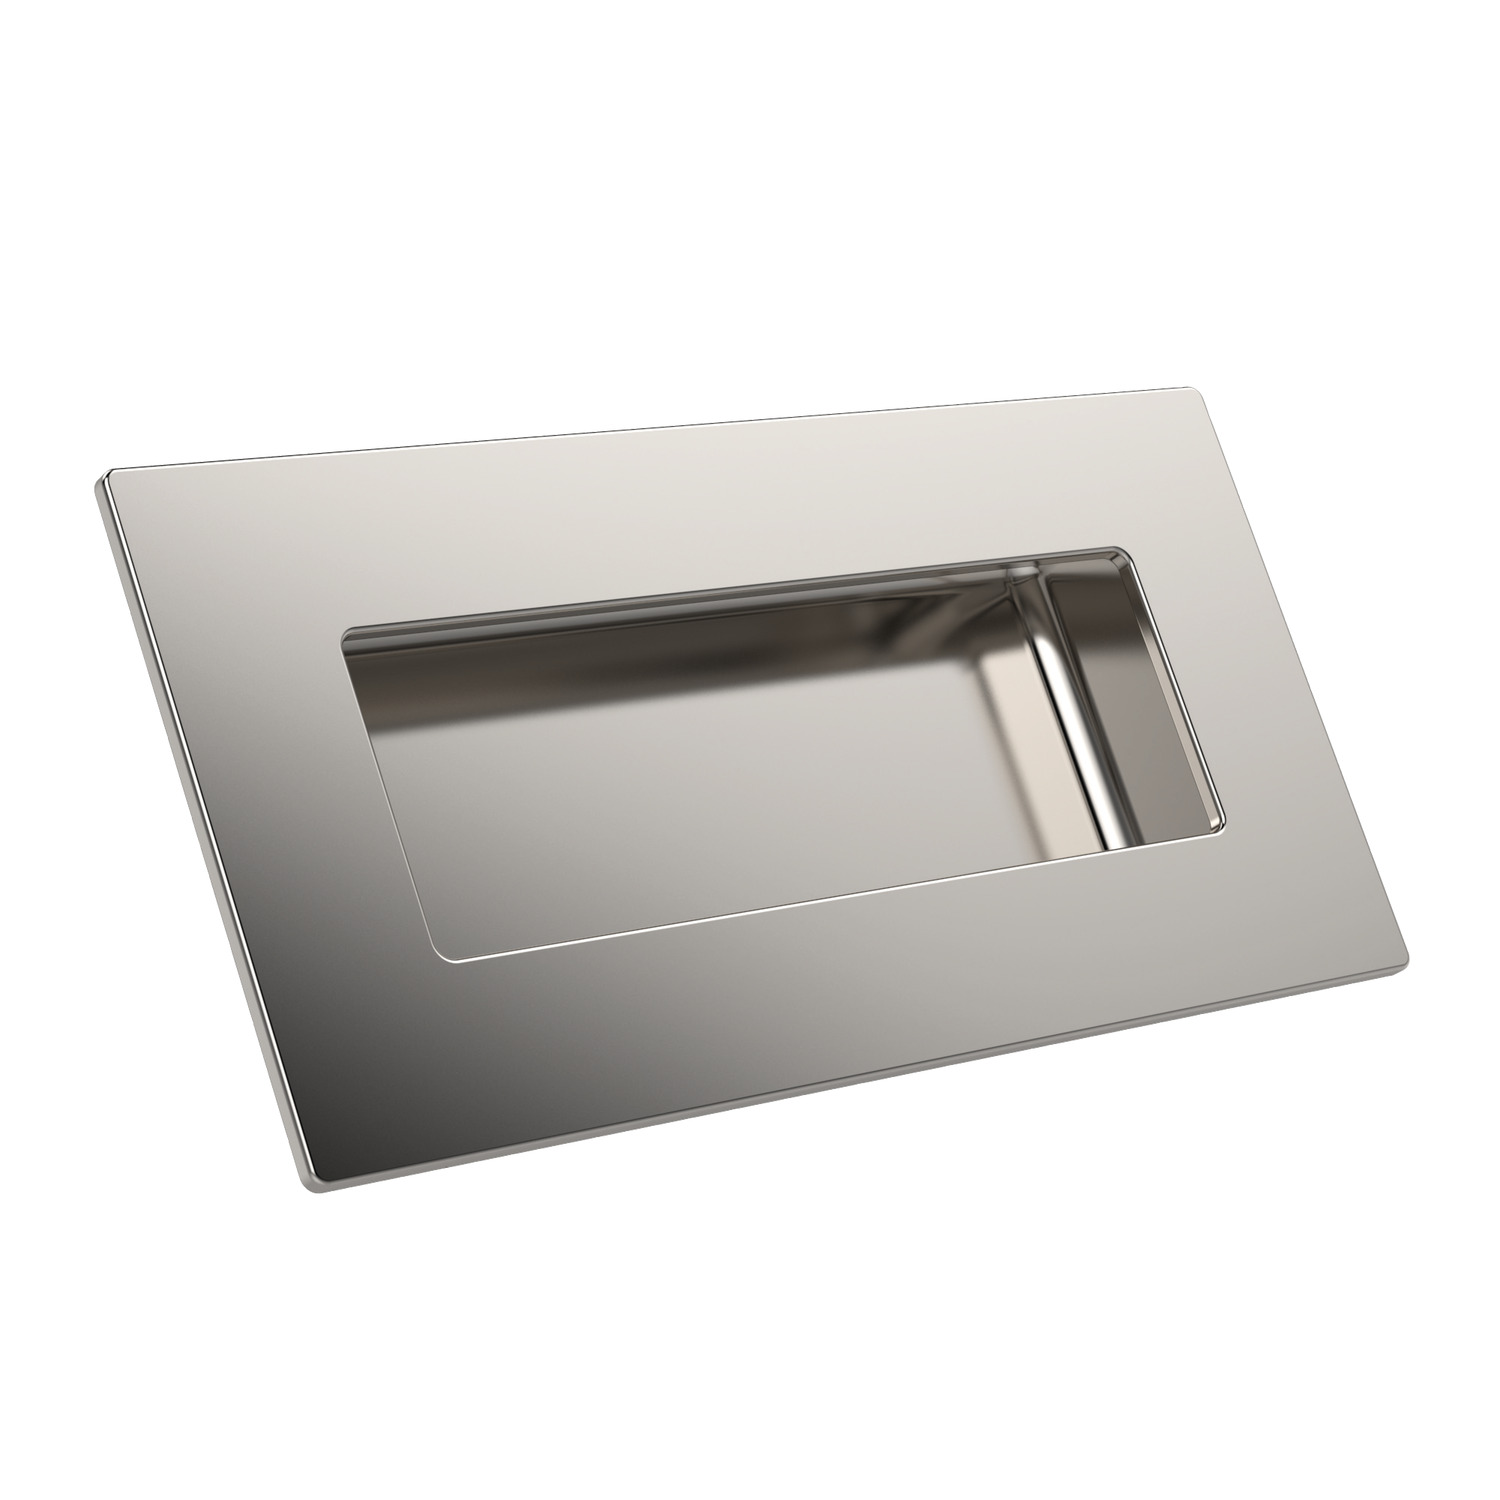 Pull Handles - Recessed Rear mounting stainless steel recessed pull handles. AISI 304 satin finish. Supplied with stainless steel M4 Nut.